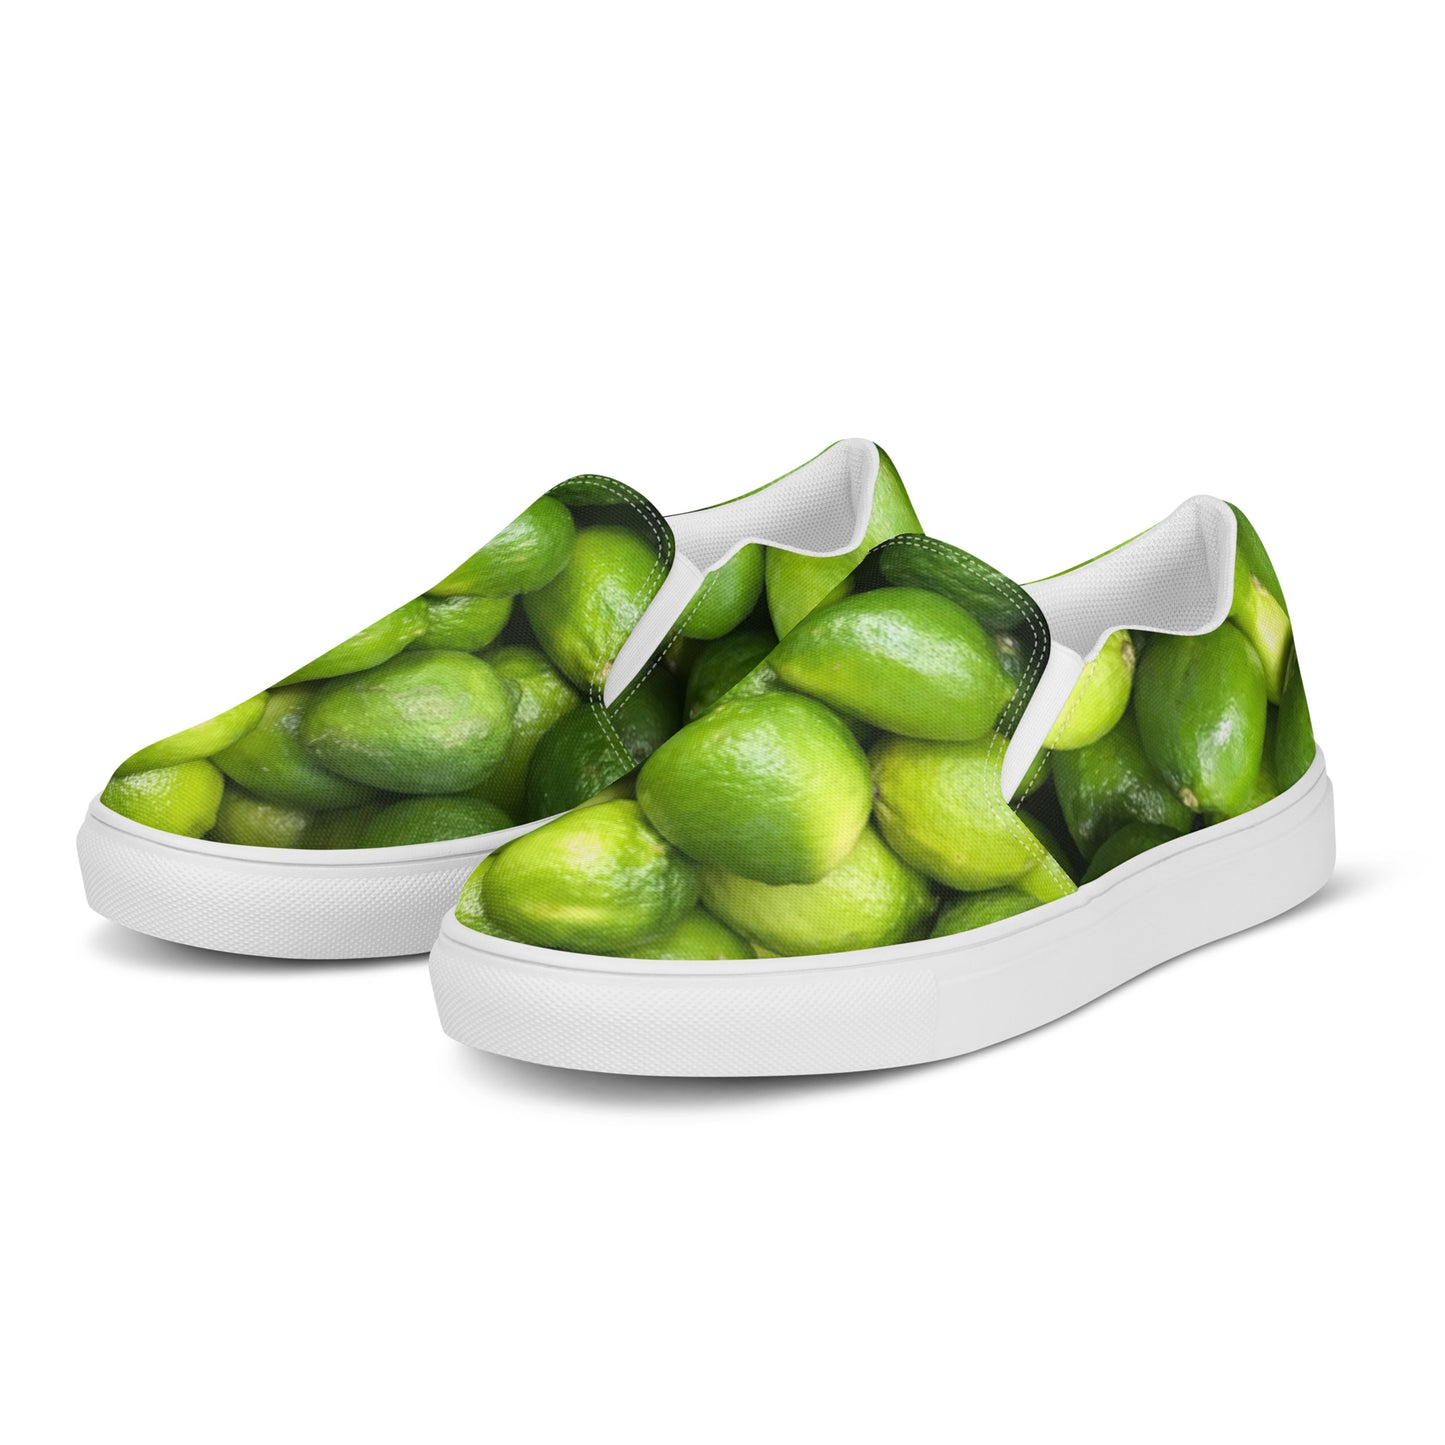 MOJITOS by DOLVING - Women’s slip-on canvas shoes